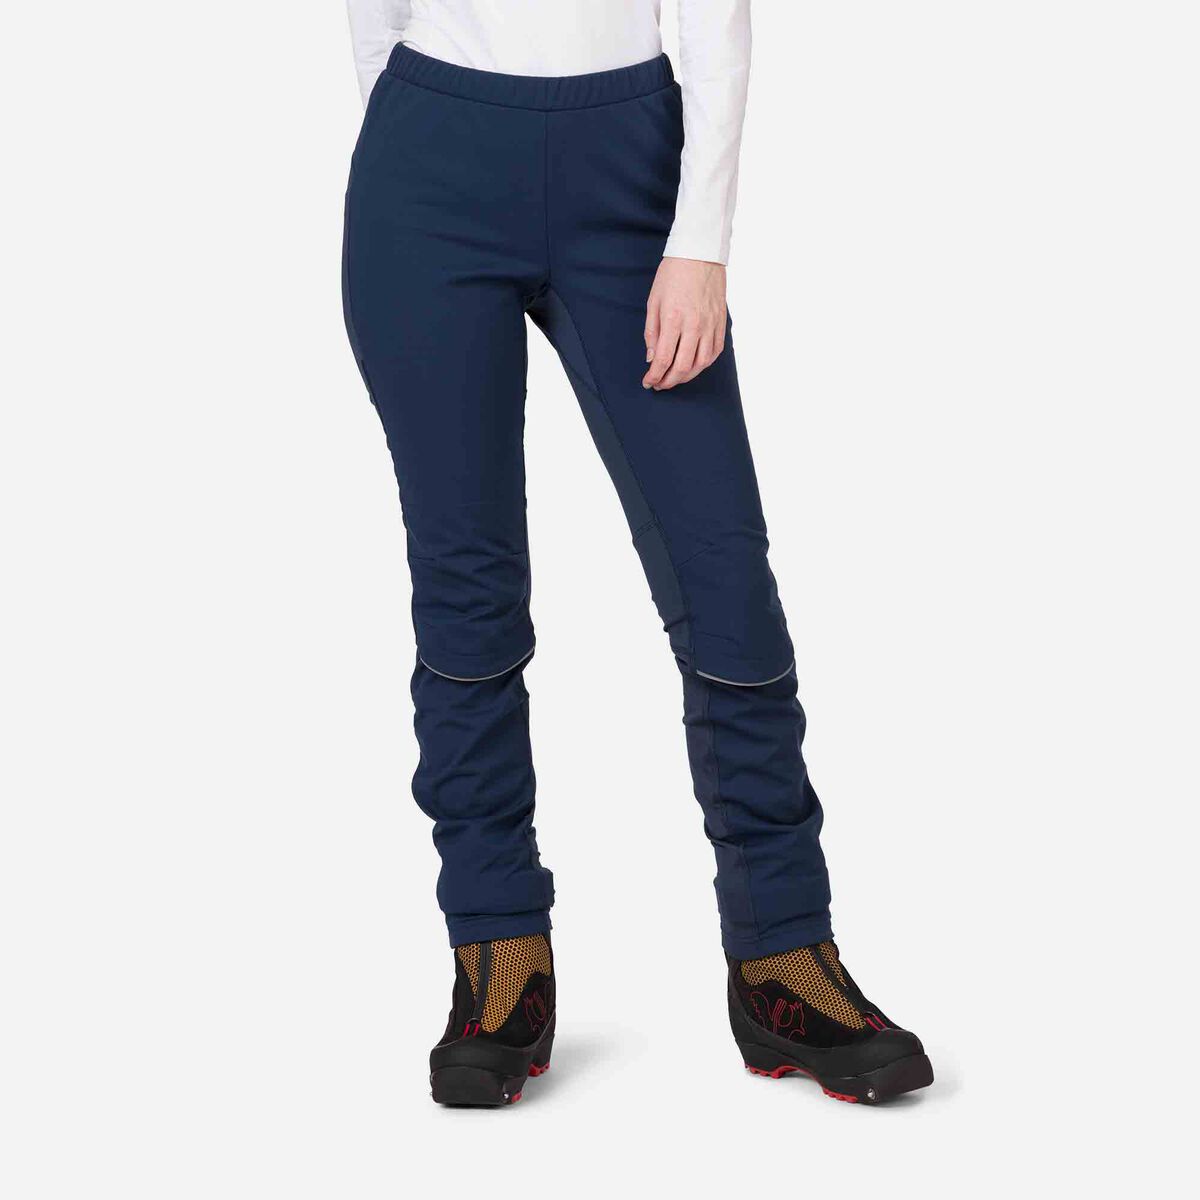 F&F Clothing Women's Pants On Sale Up To 90% Off Retail